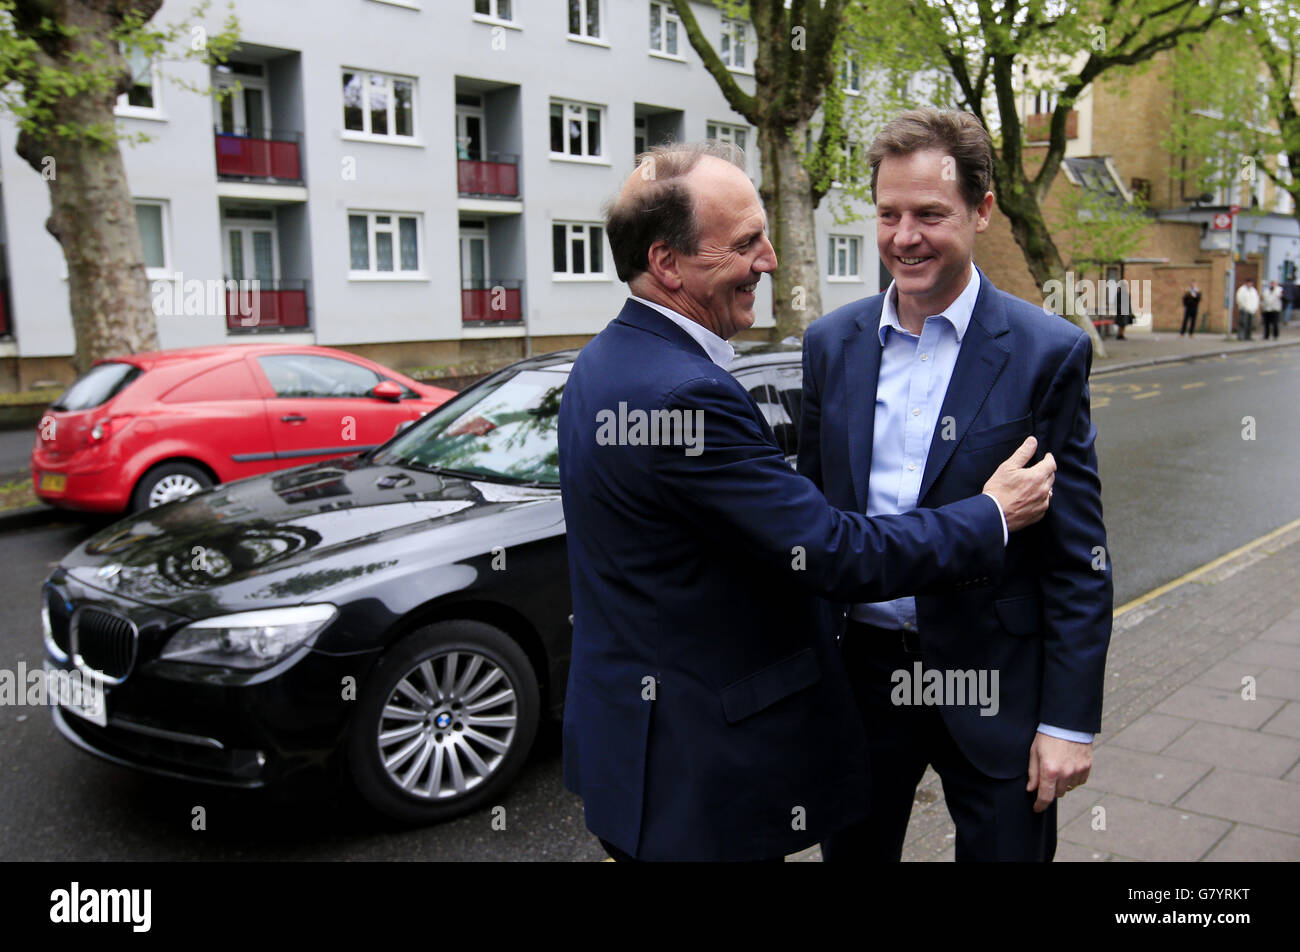 Liberal Democrat Party leader Nick Clegg with parliamentary candidate for Bermondsey and Old Southwark Simon Hughes (left) attend a campaign rally at Rennie and Manor Estates Tenants Association Hall, Bermondsey, London. Stock Photo